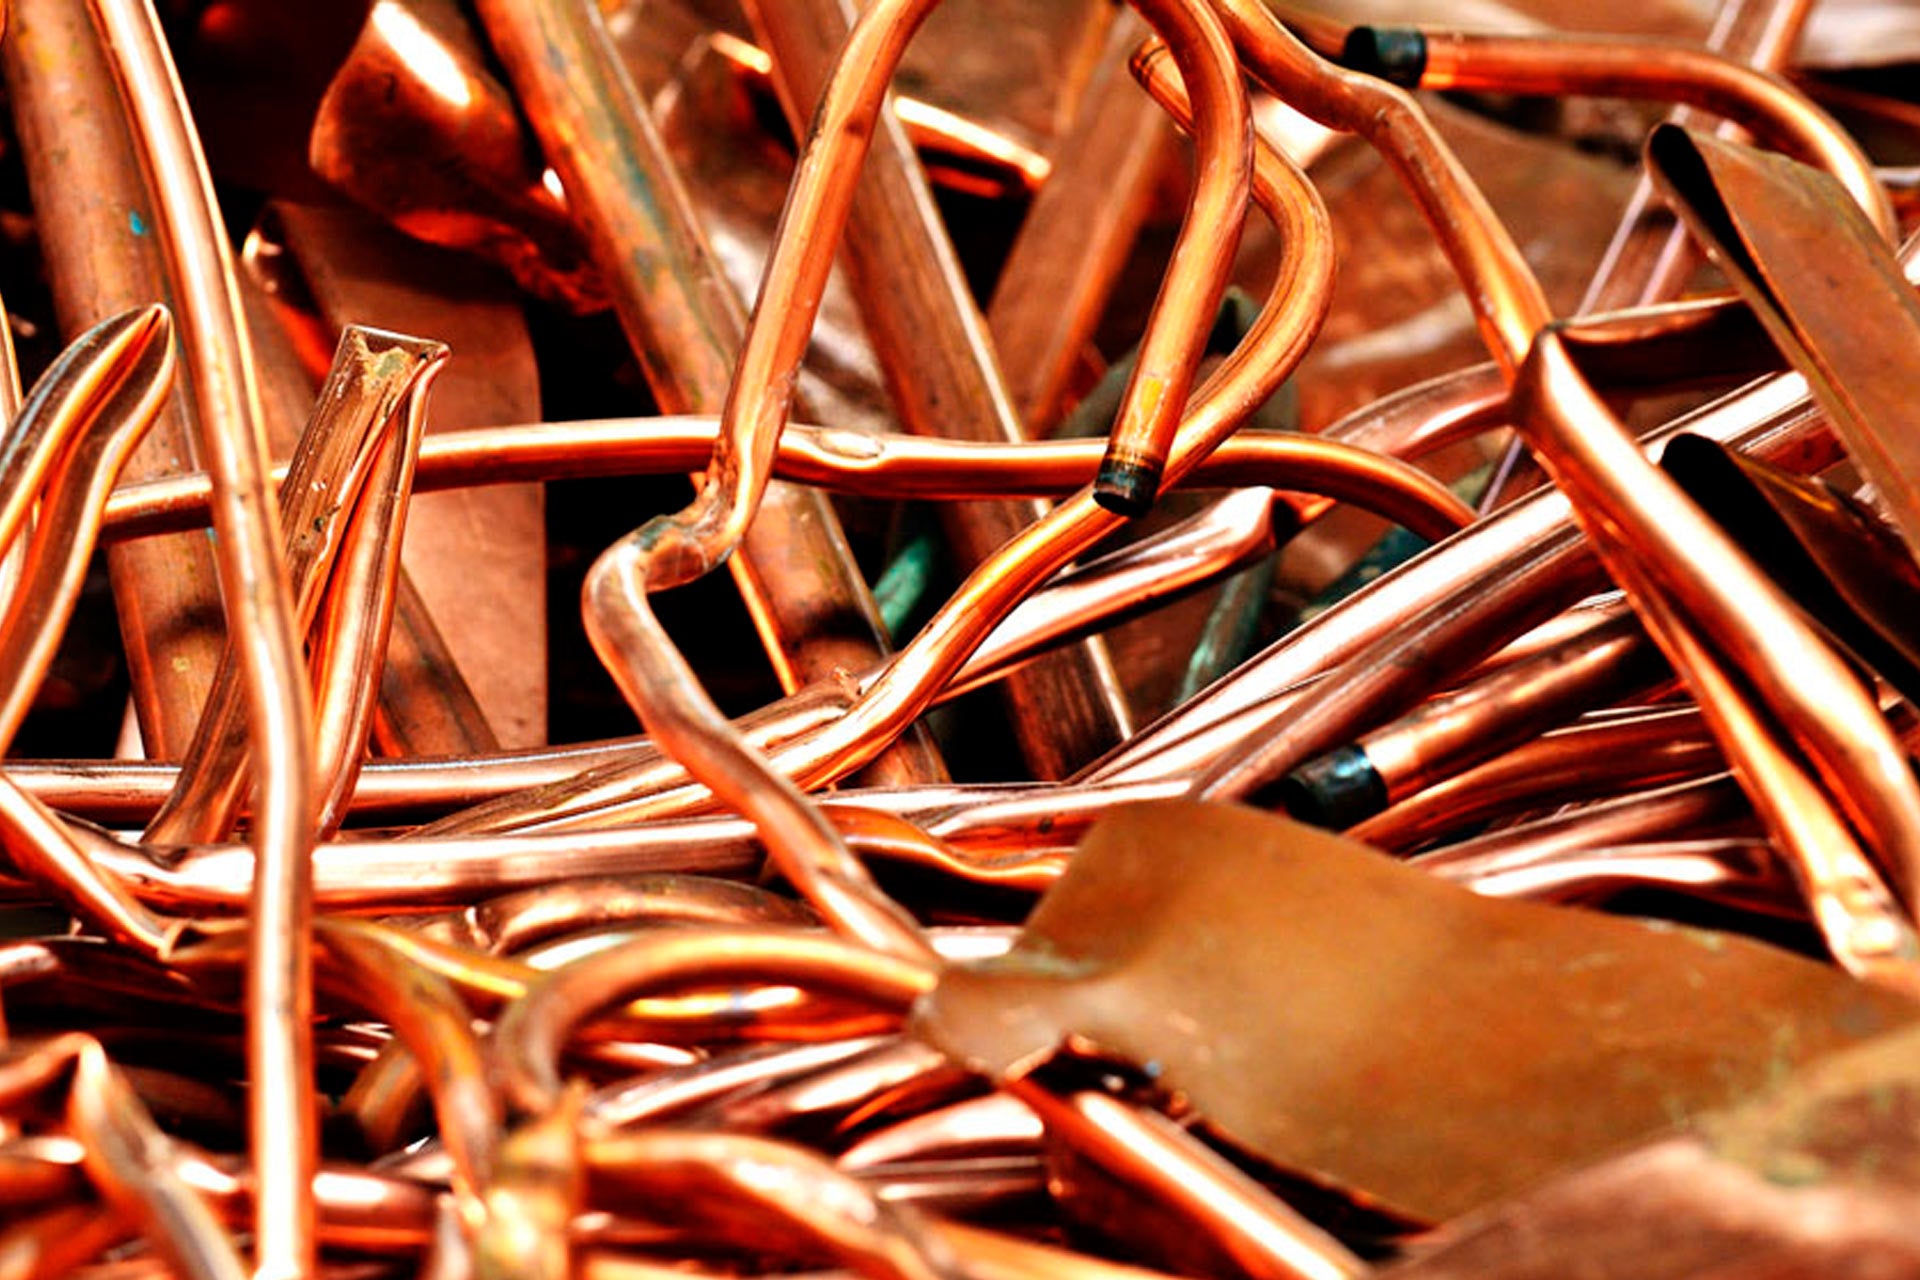 Sustainability and Copper Recycling RECYCLED COPPER PANS MADE BY EXPERT HANDS IN MEXICO.